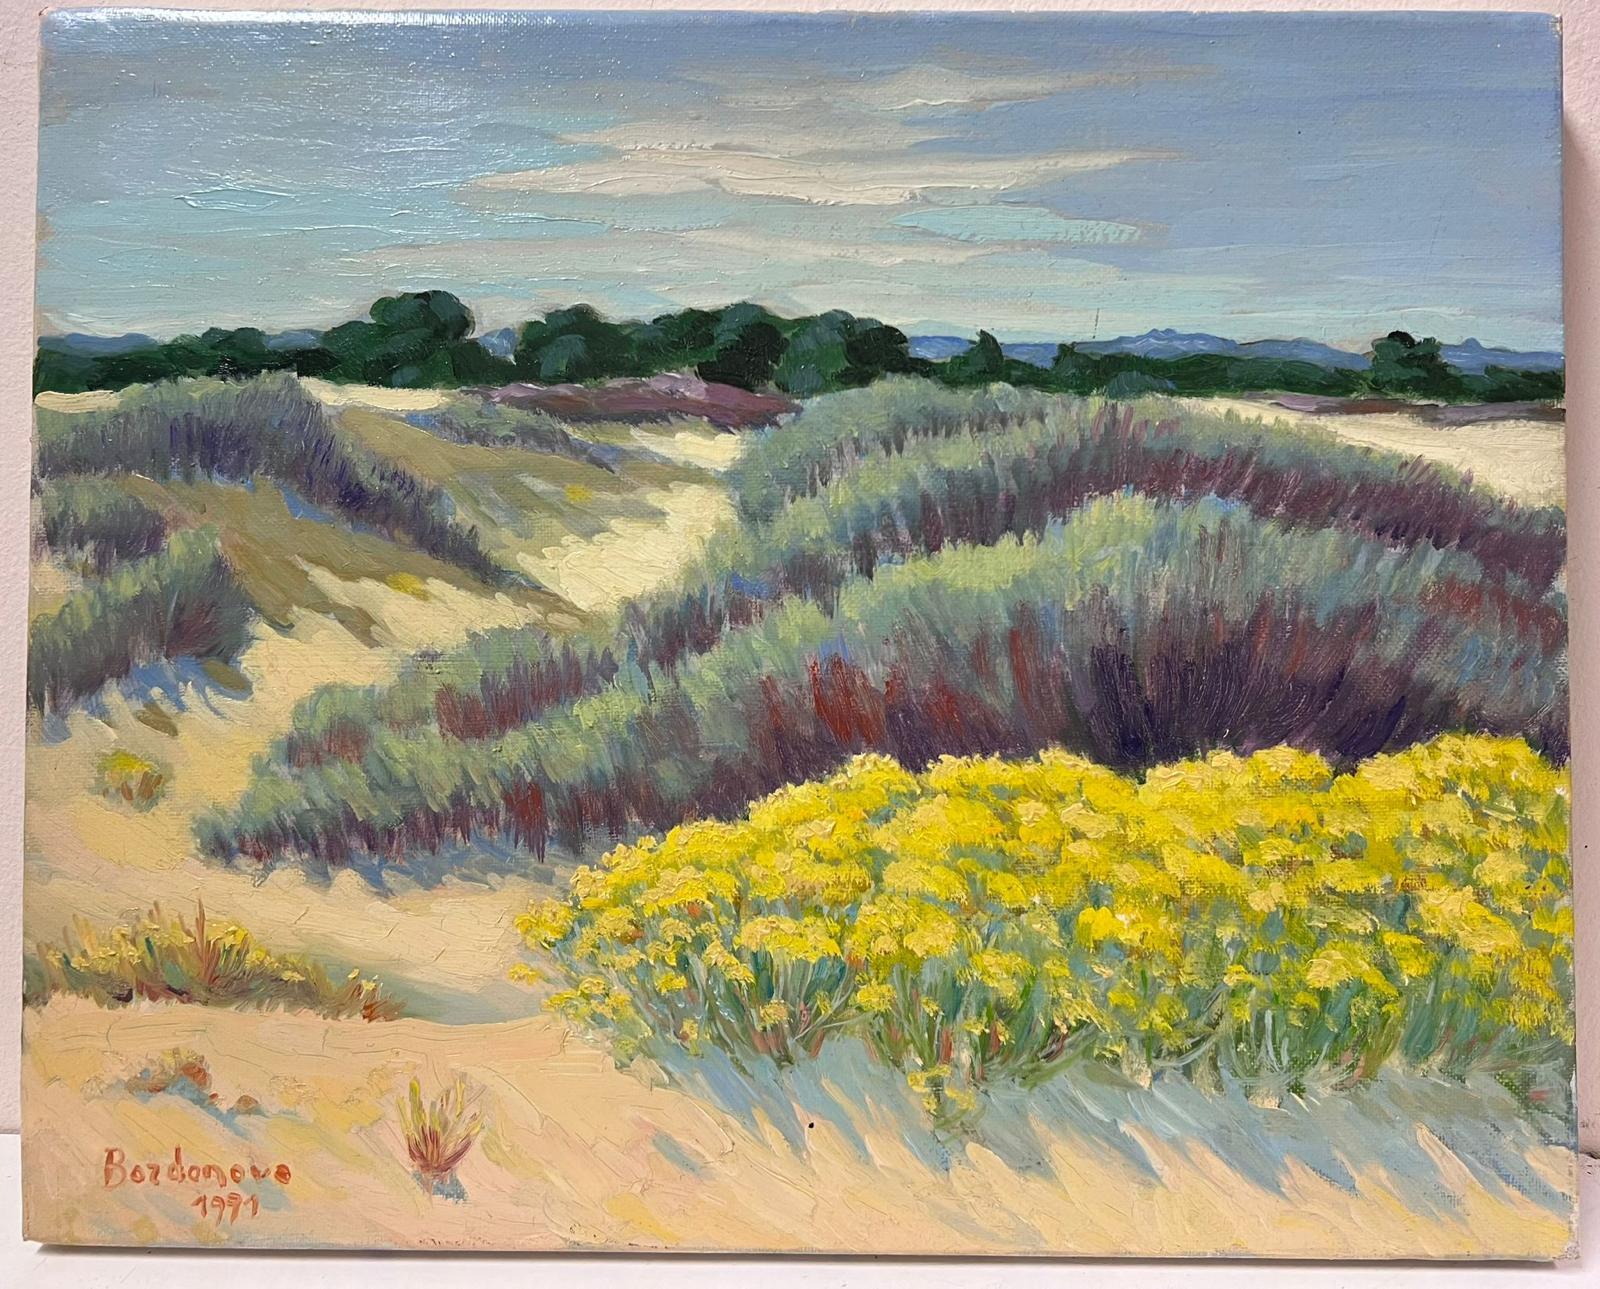 Contemporary French Impressionist Oil Sand Dunes Yellow Flowers Beach 1991 - Painting by Georges Bordonove